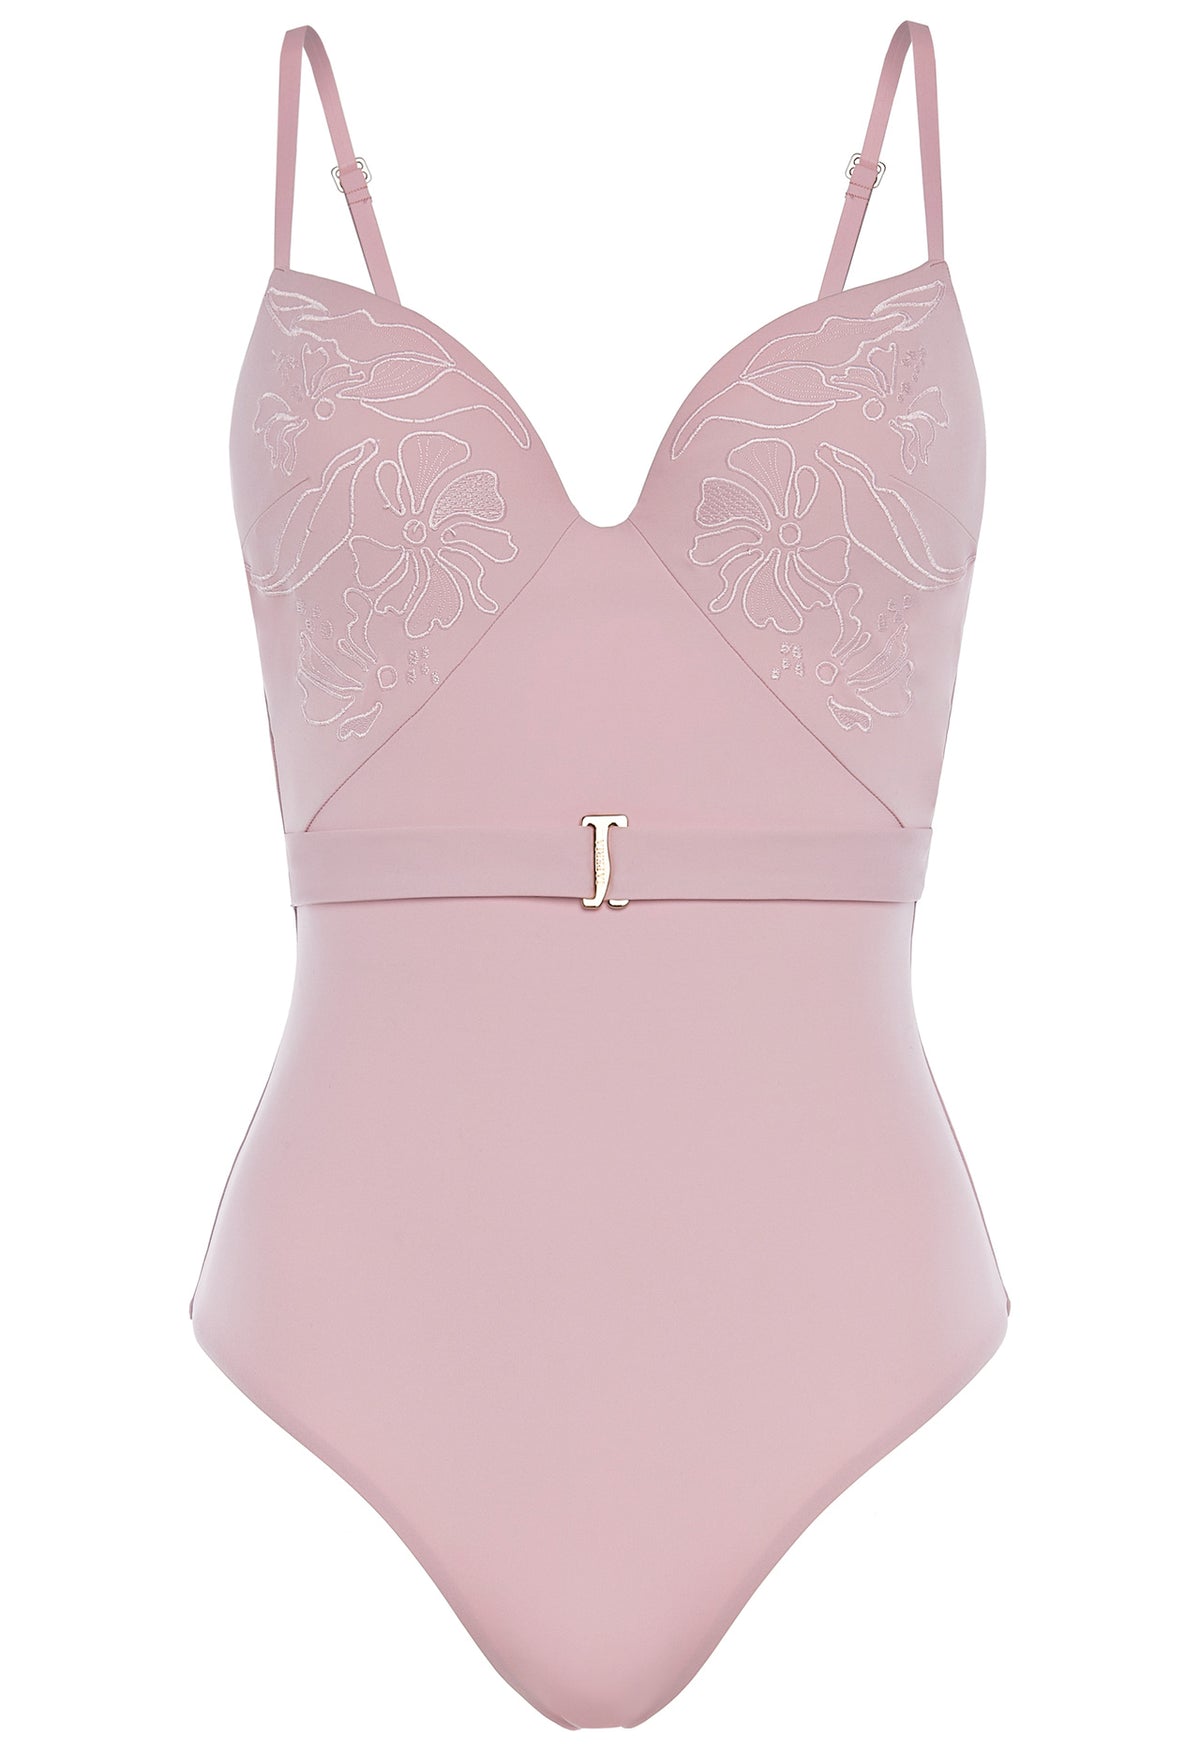 Padded underwired swimsuit